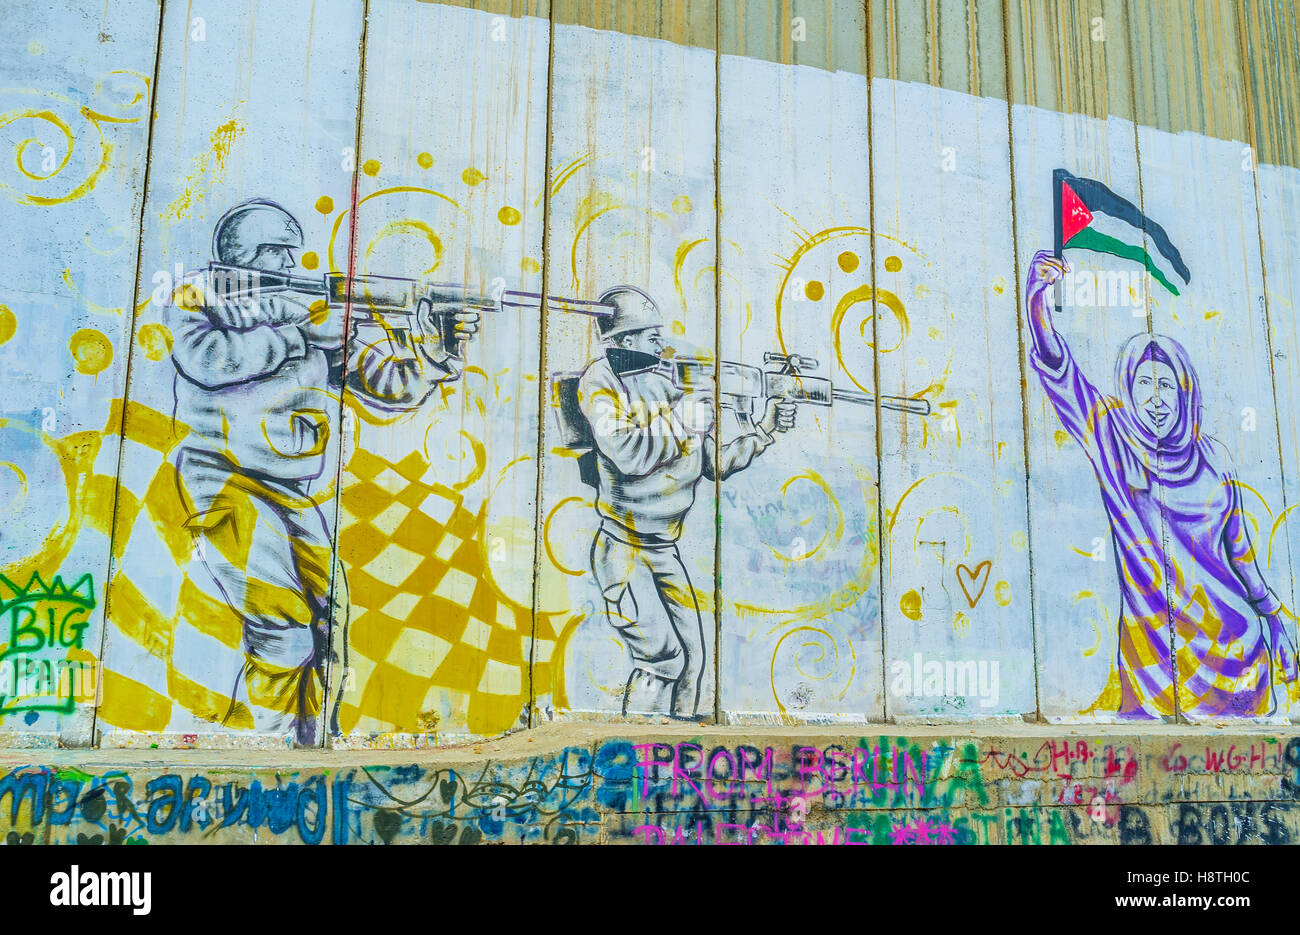 The mural that depicting Israeli - Palestinian conflict on the separation wall Stock Photo